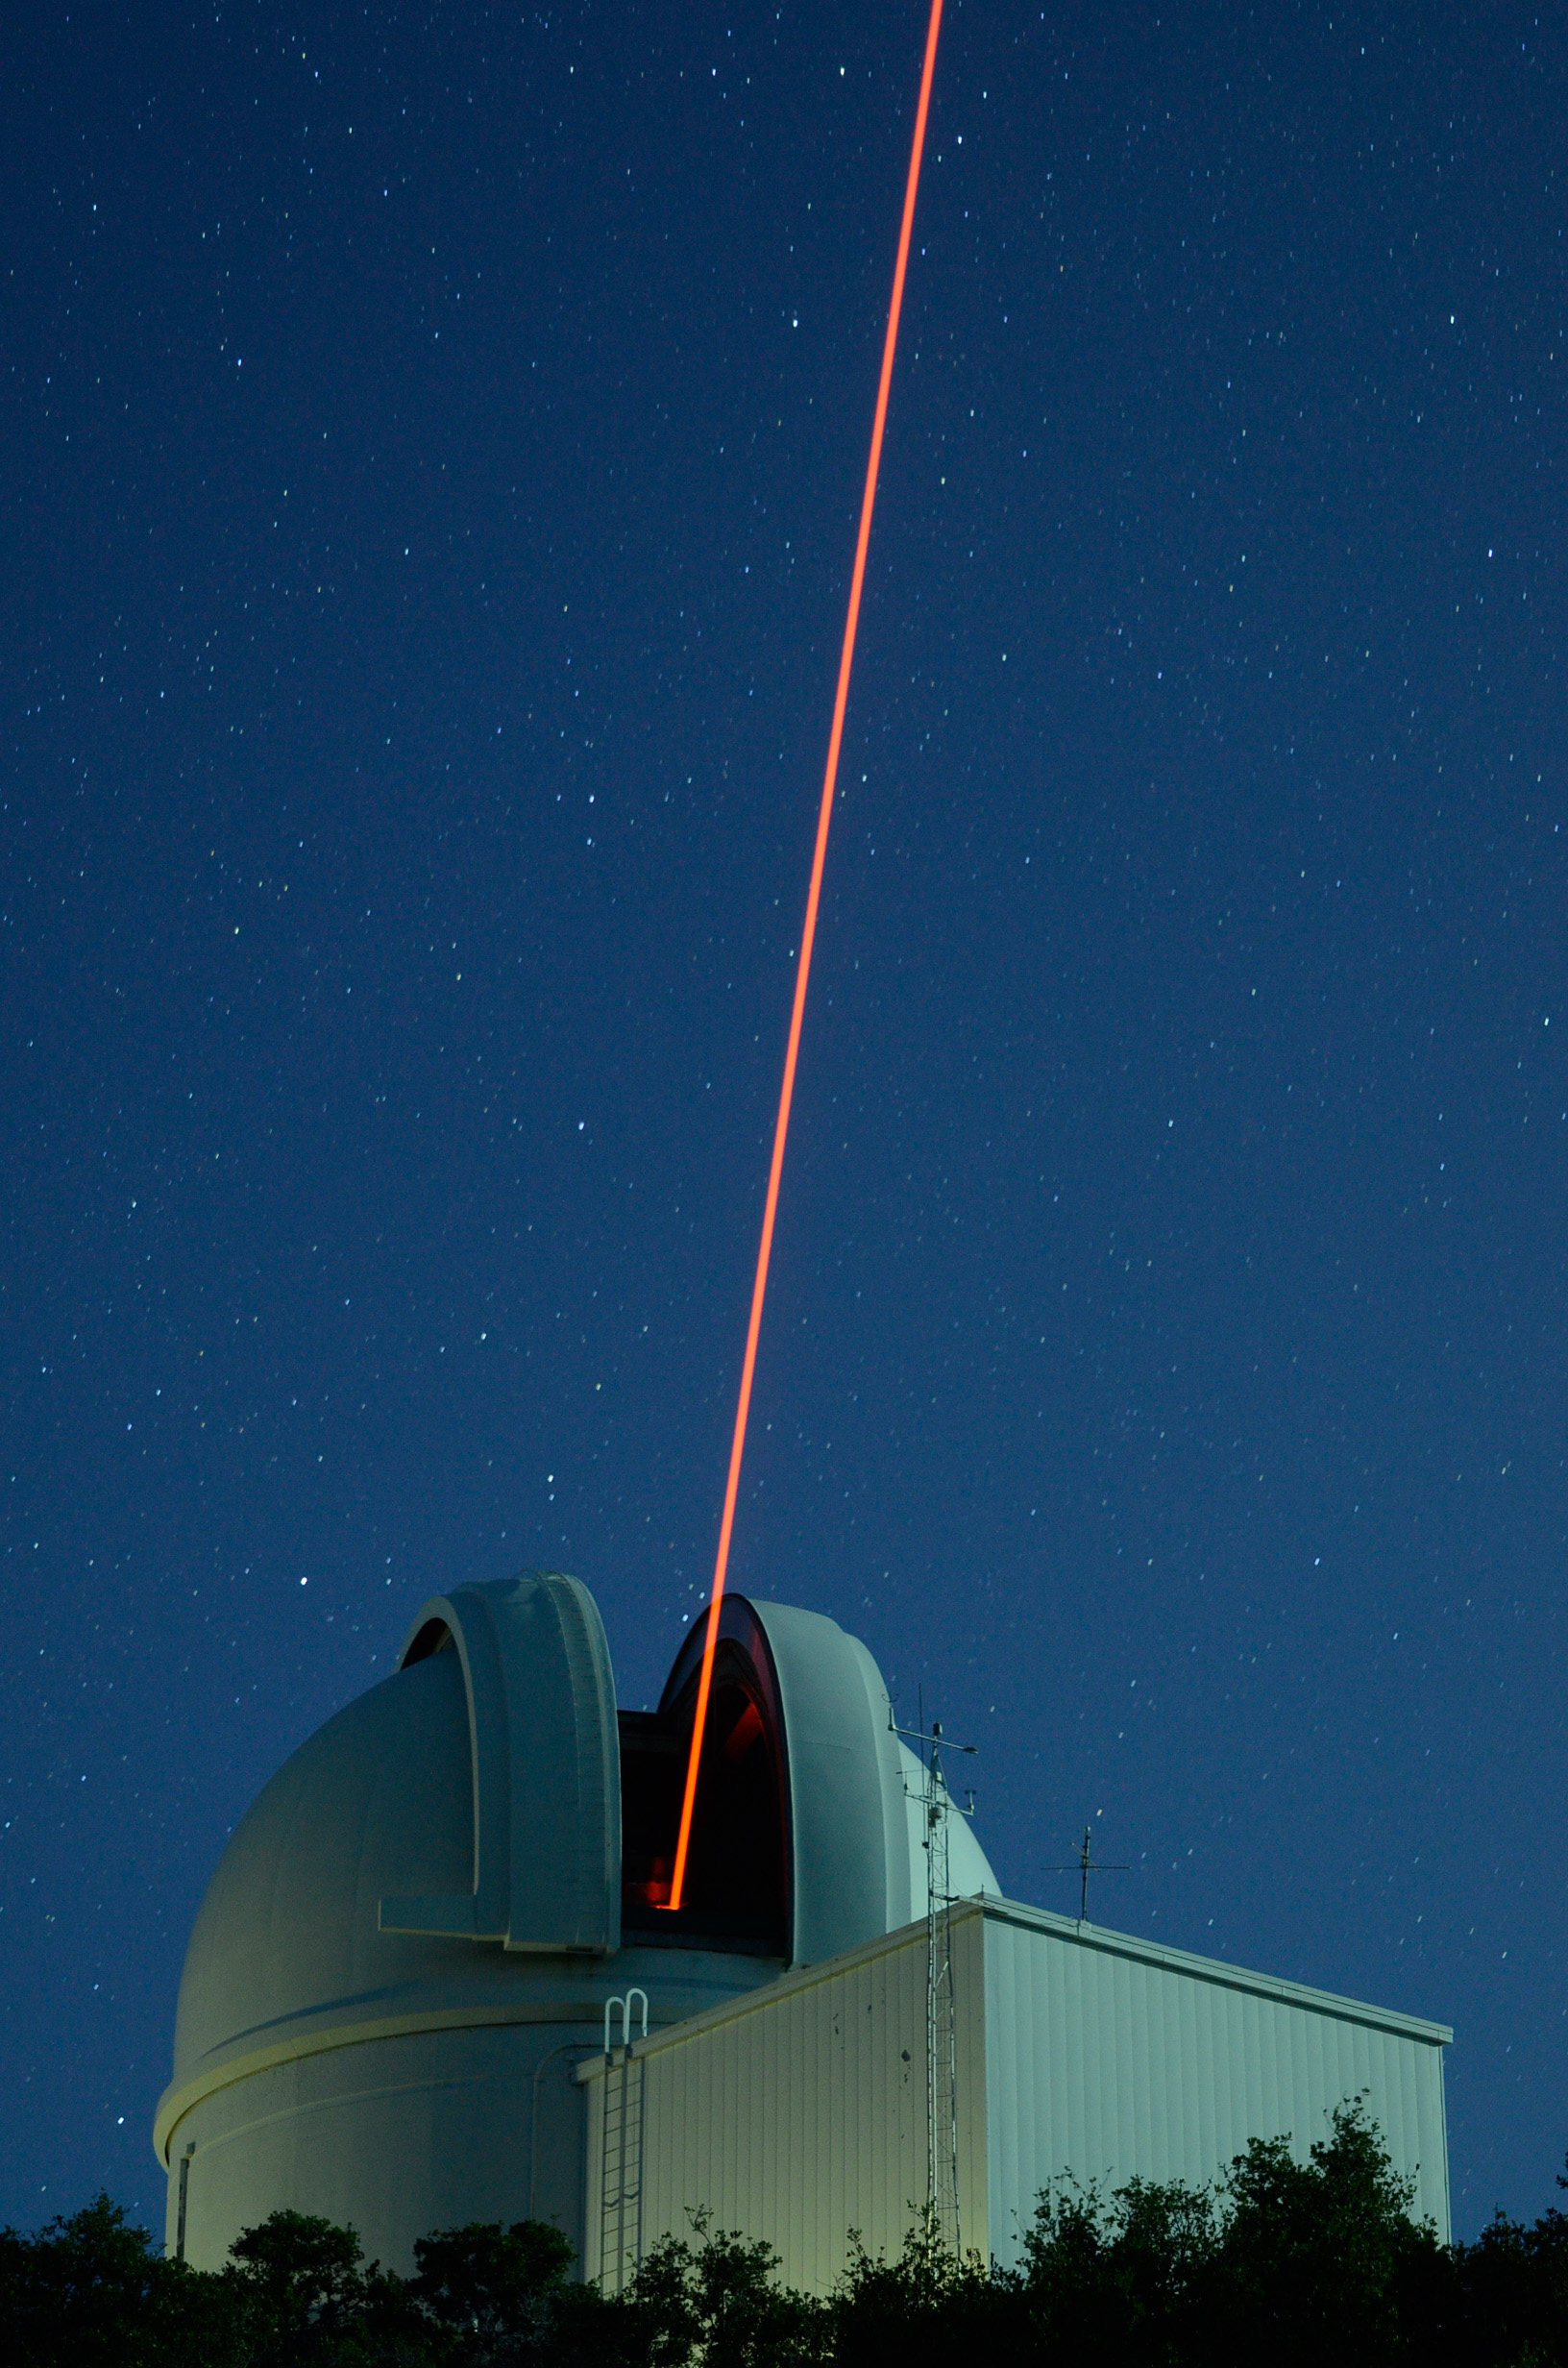 The ultraviolet Robo-AO laser at the California Institute of Technology's Palomar Observatory. (photo courtesy of Robo-AO collaboration)